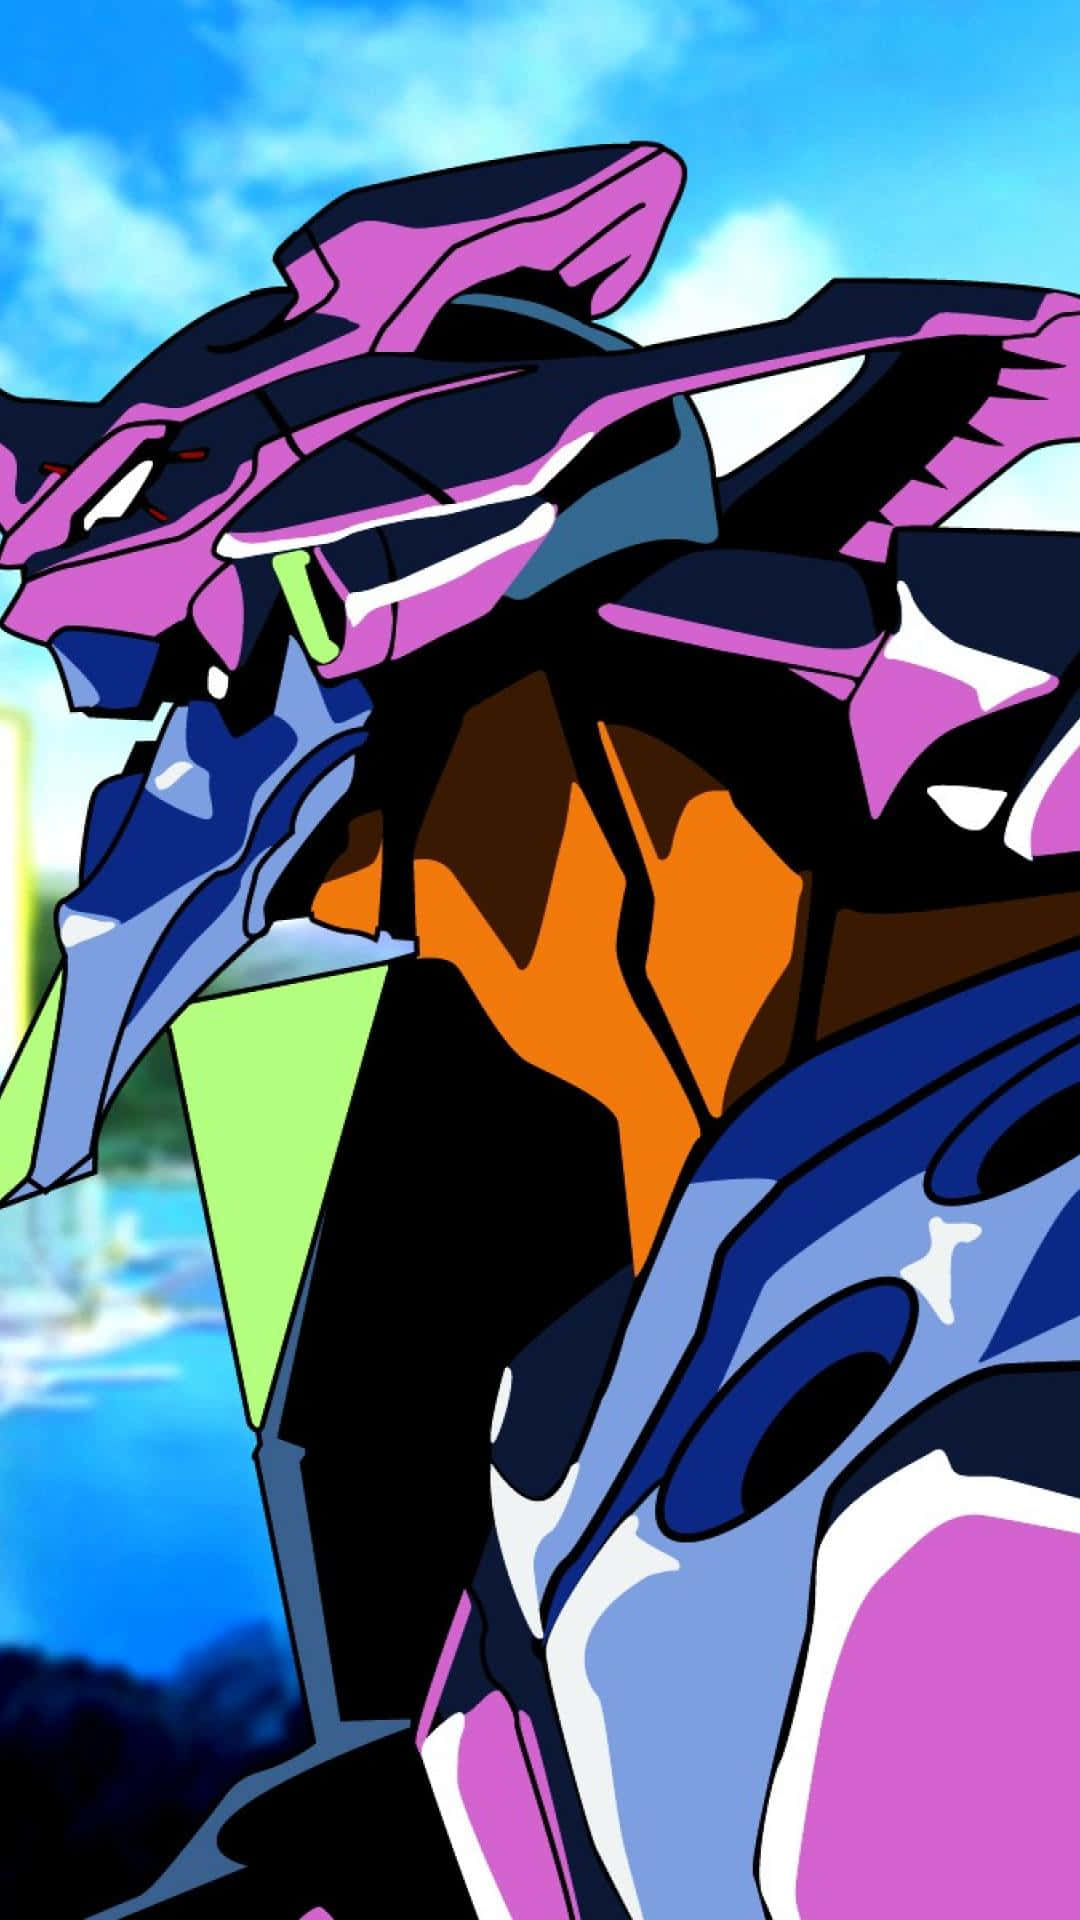 Get the cool new Neon Genesis Evangelion Iphone and show off your fandom Wallpaper